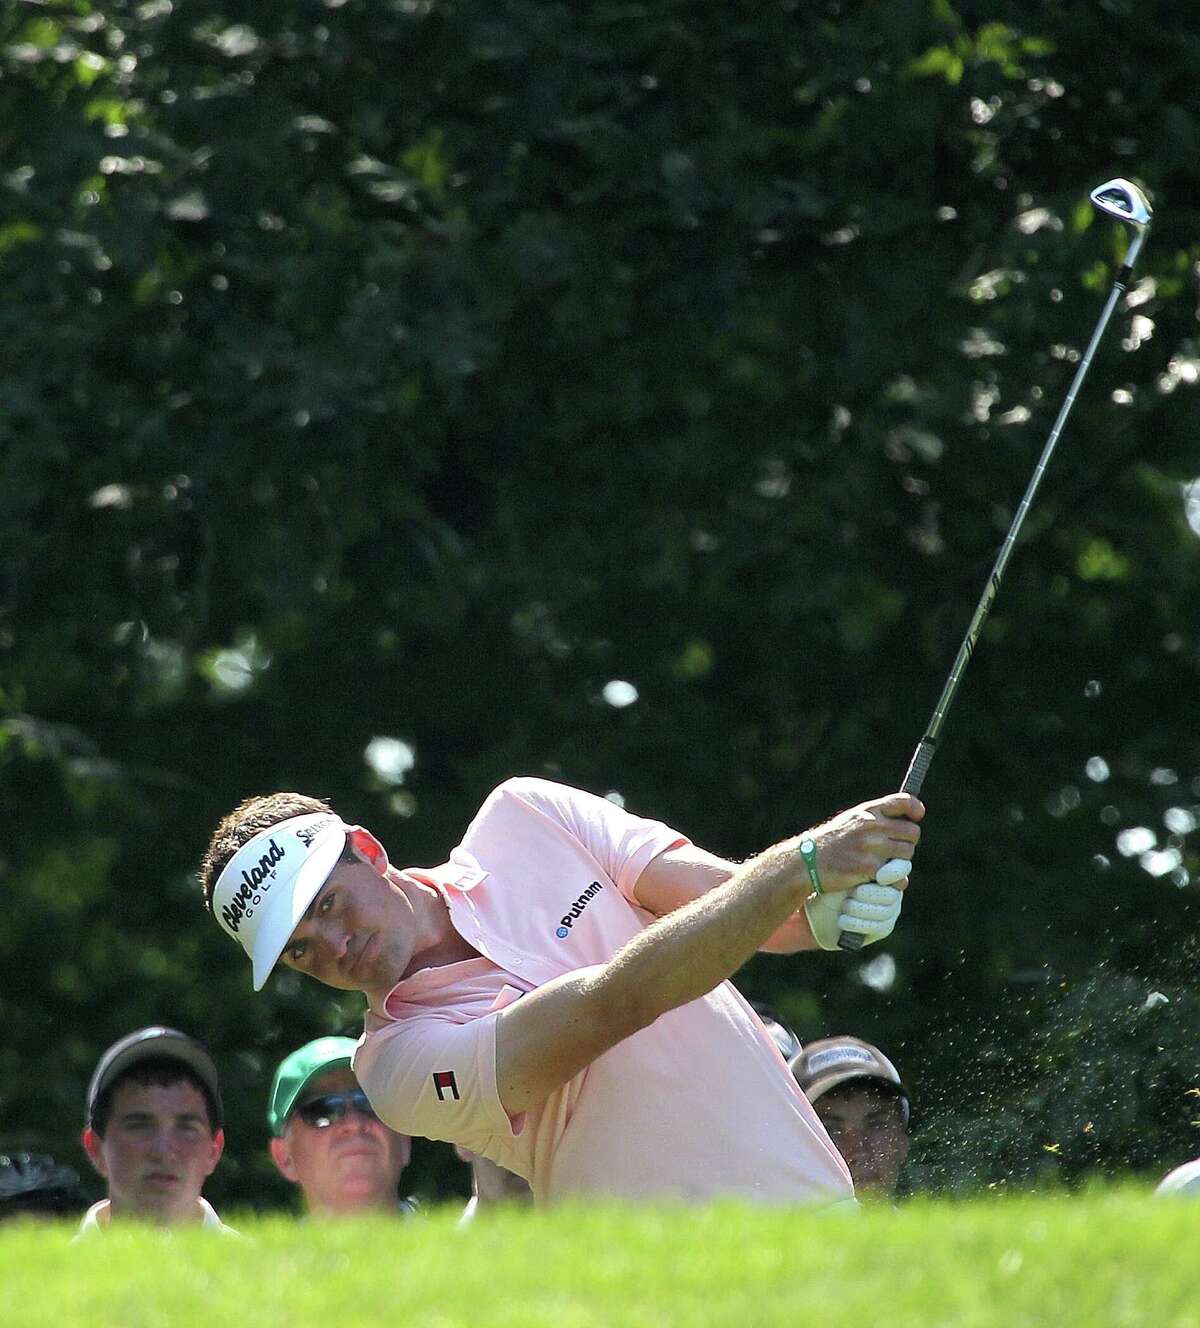 CROMWELL, CT - JUNE 21: Keegan Bradley hits a shot towards the 11th green during Round One of the 2012 Travelers Championship at TPC River Highlands on June 21, 2012 in Cromwell, Connecticut. (Photo by Jim Rogash/Getty Images)